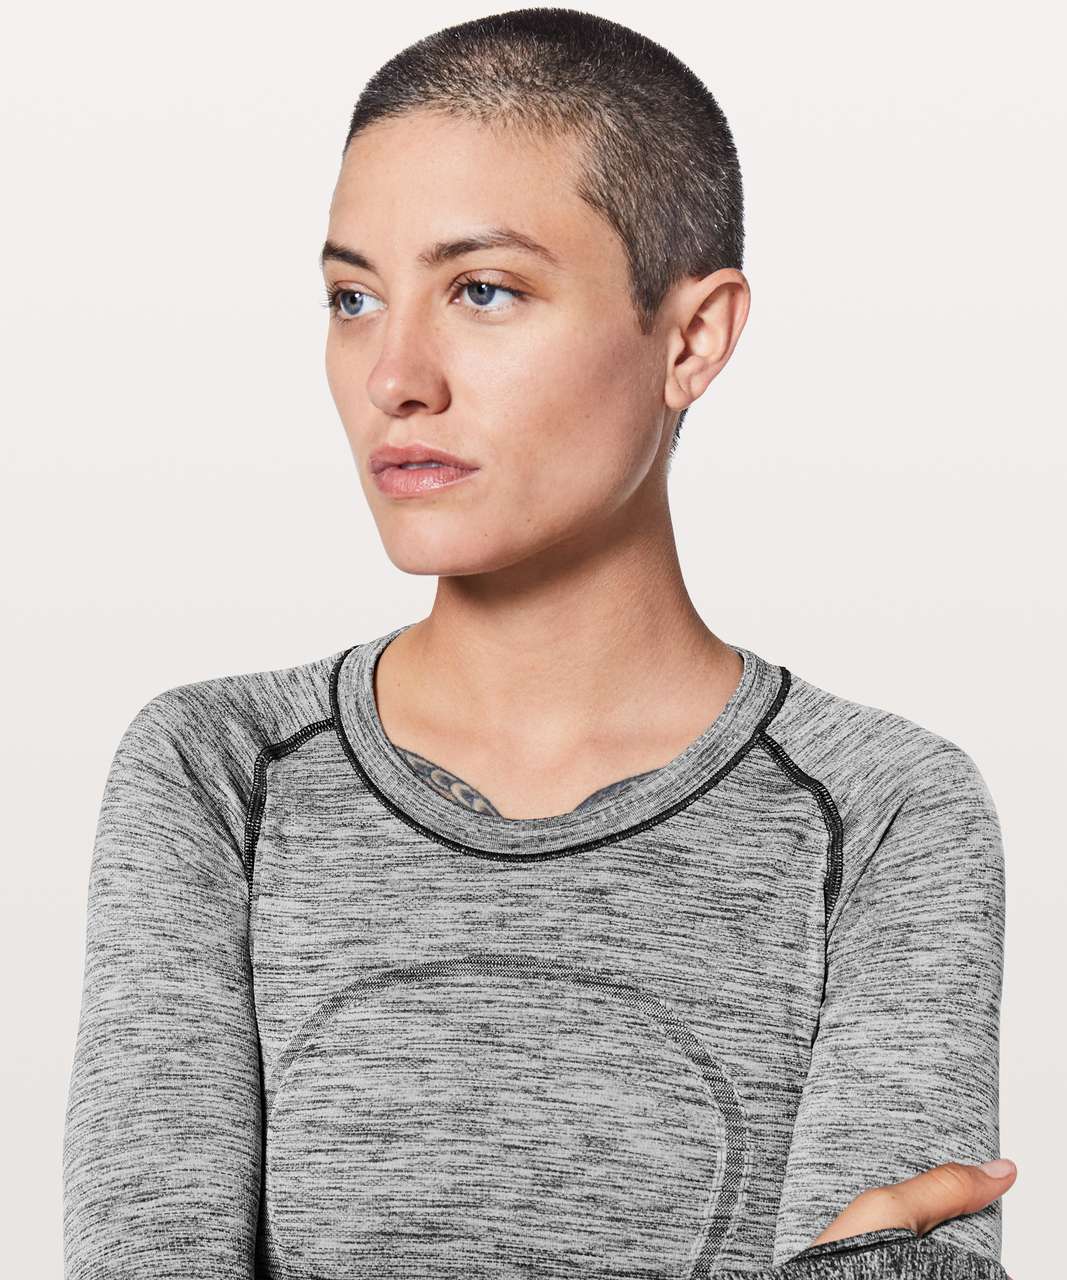 Lululemon Swiftly Tech Long Sleeve - Black Gray Ombré Size 8 - $19 (75% Off  Retail) - From Vivian